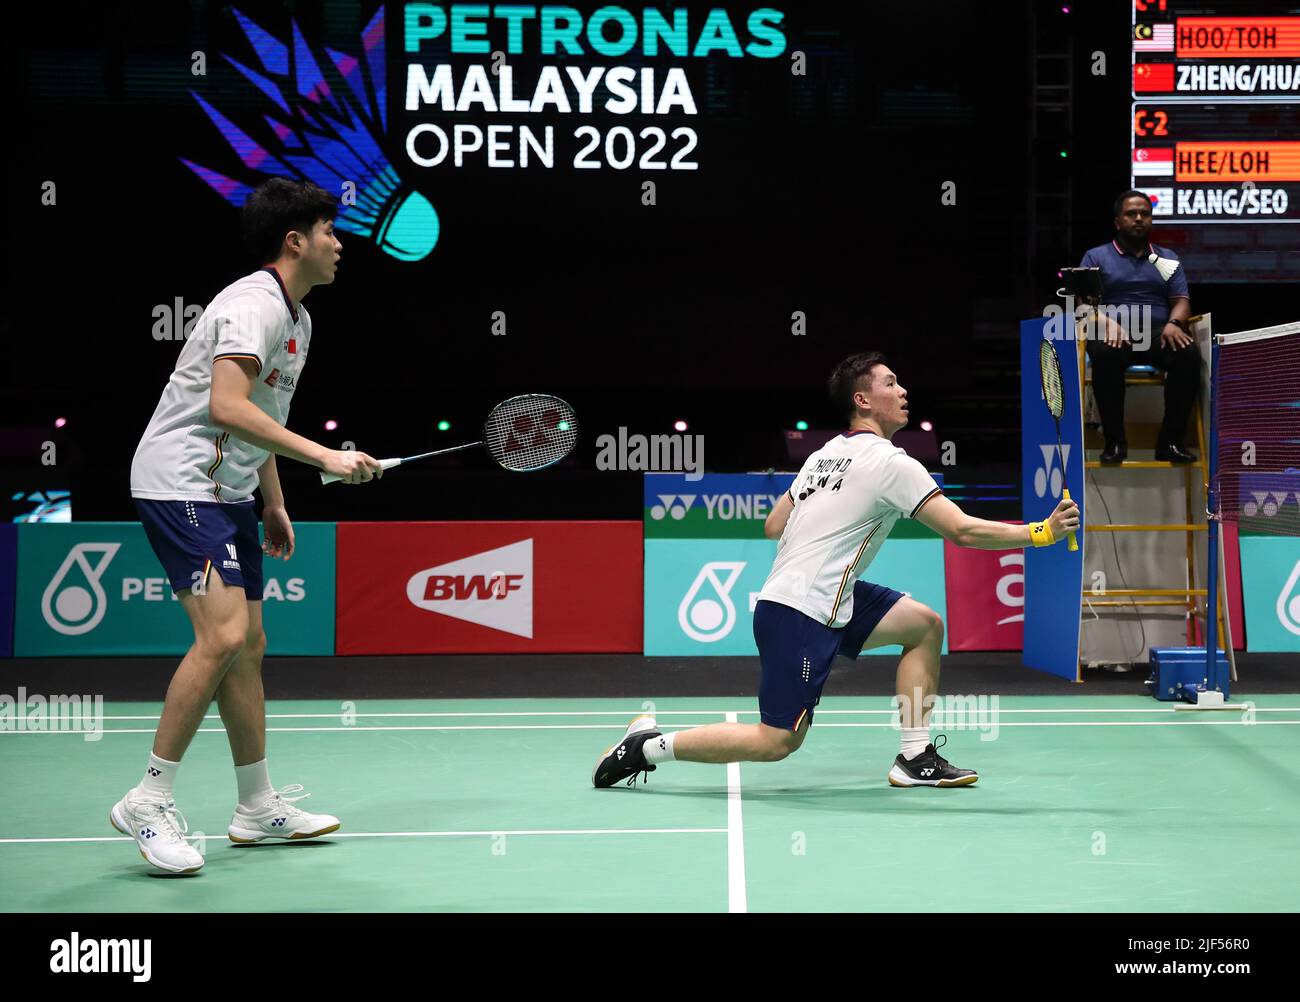 Kuala Lumpur, Malaysia. 29th June, 2022. He Ji Ting and Zhou Hao Dong of China play against Boon Xin Yuan and Wong Tien CI of Malaysia during the Men's Doubles round one match of the Petronas Malaysia Open 2022 at Axiata Arena, Bukit Jalil. (Photo by Wong Fok Loy/SOPA Images/Sipa USA) Credit: Sipa USA/Alamy Live News Stock Photo